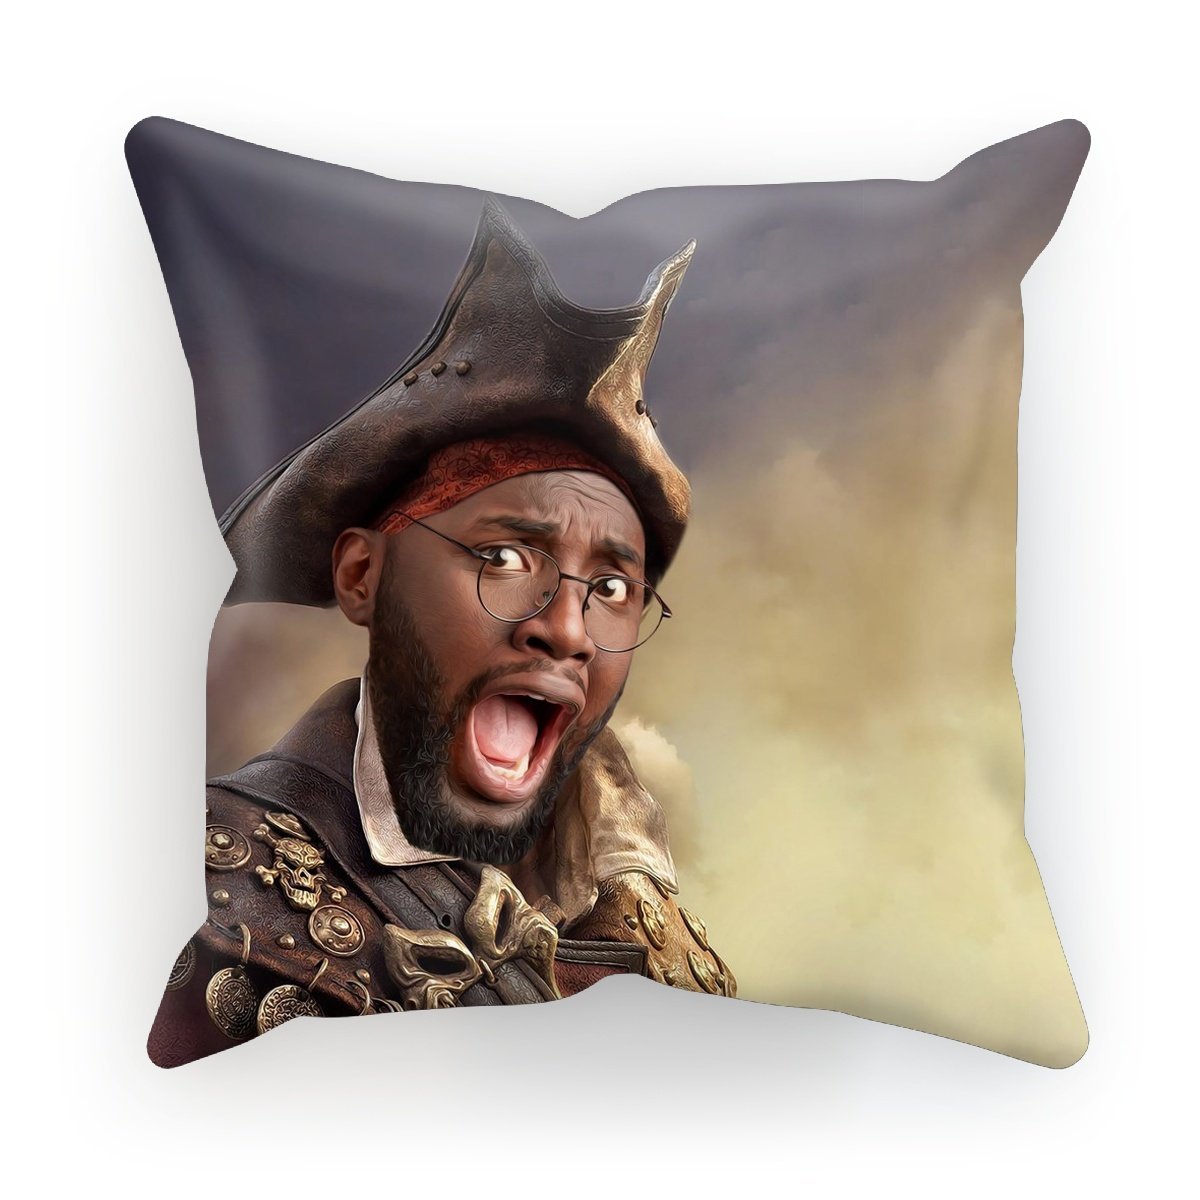 The Pirate: Custom Male Throw Pillow - Paw & Glory - #pet portraits# - #dog portraits# - #pet portraits uk#paw & glory, pet portraits pillow,dog pillows personalized, pet face pillows, dog photo on pillow, custom cat pillows, pillow with pet picture